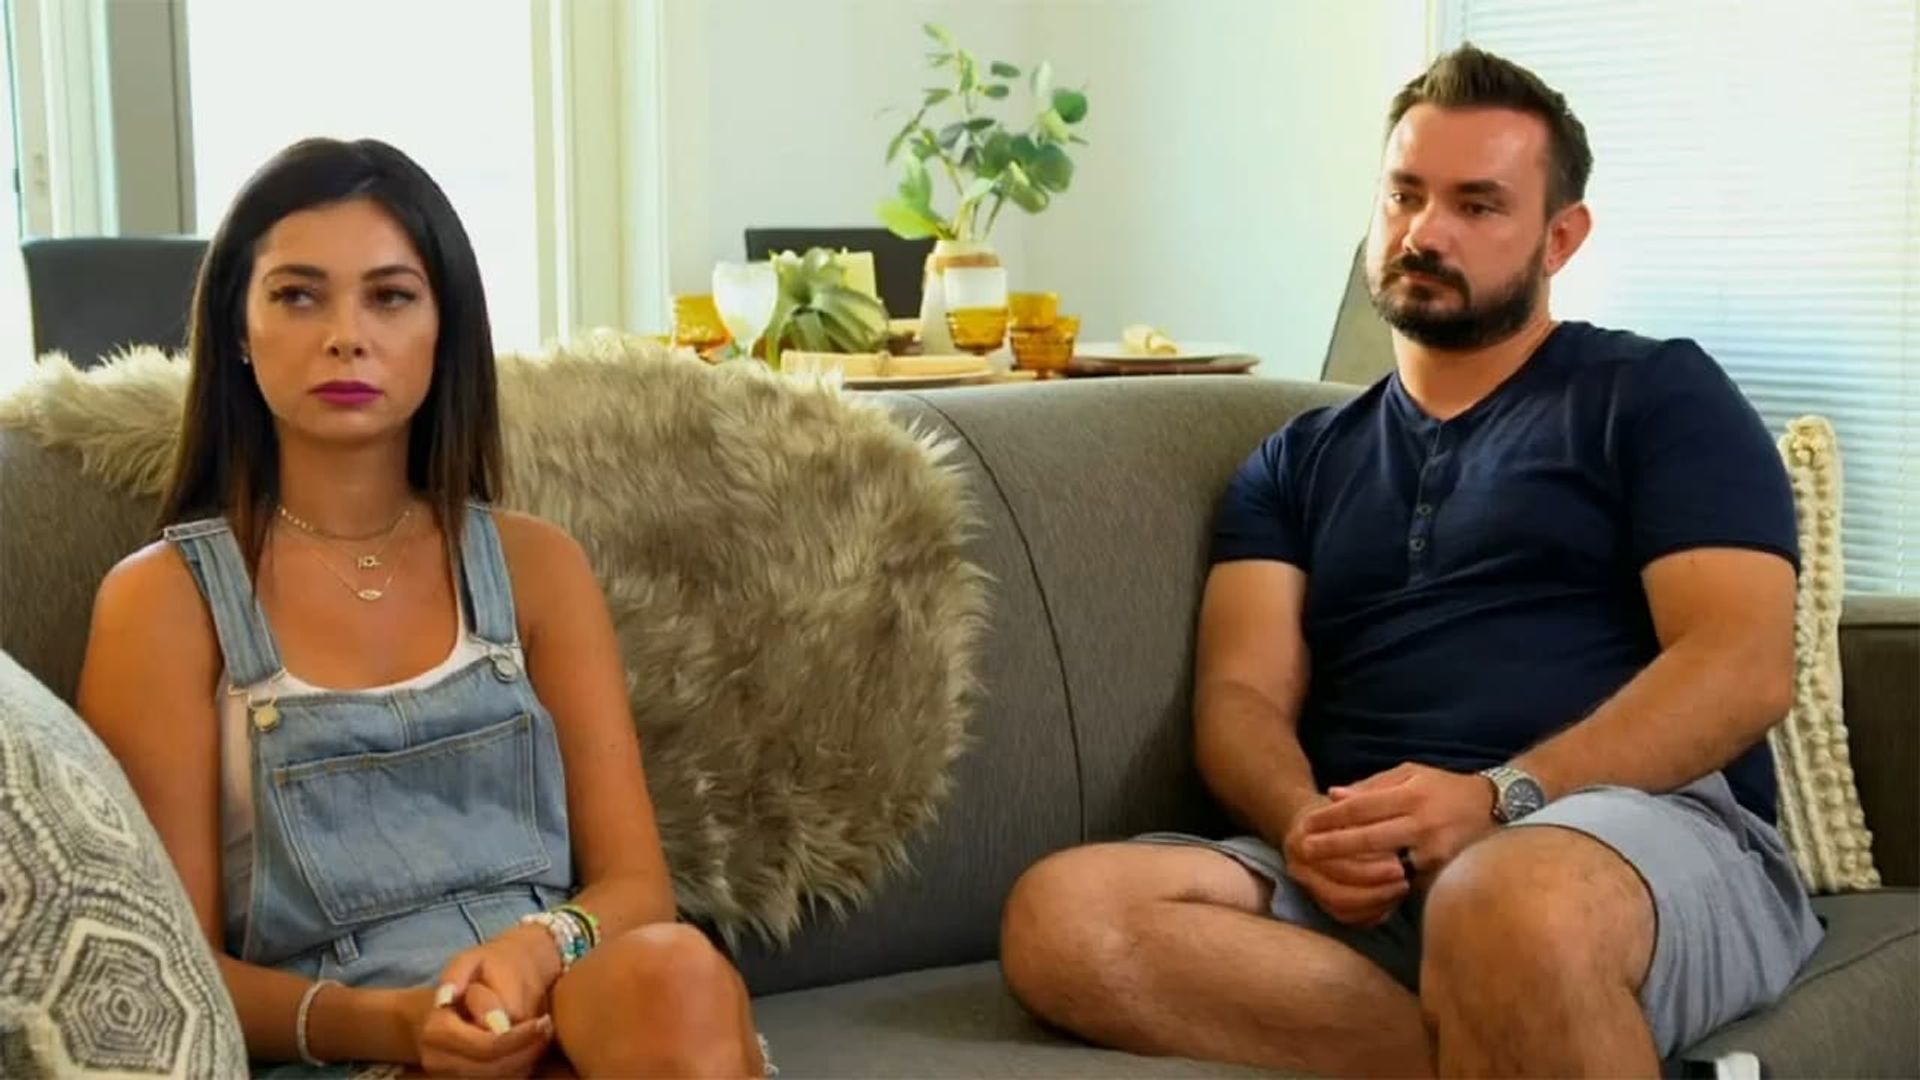 Married at First Sight background